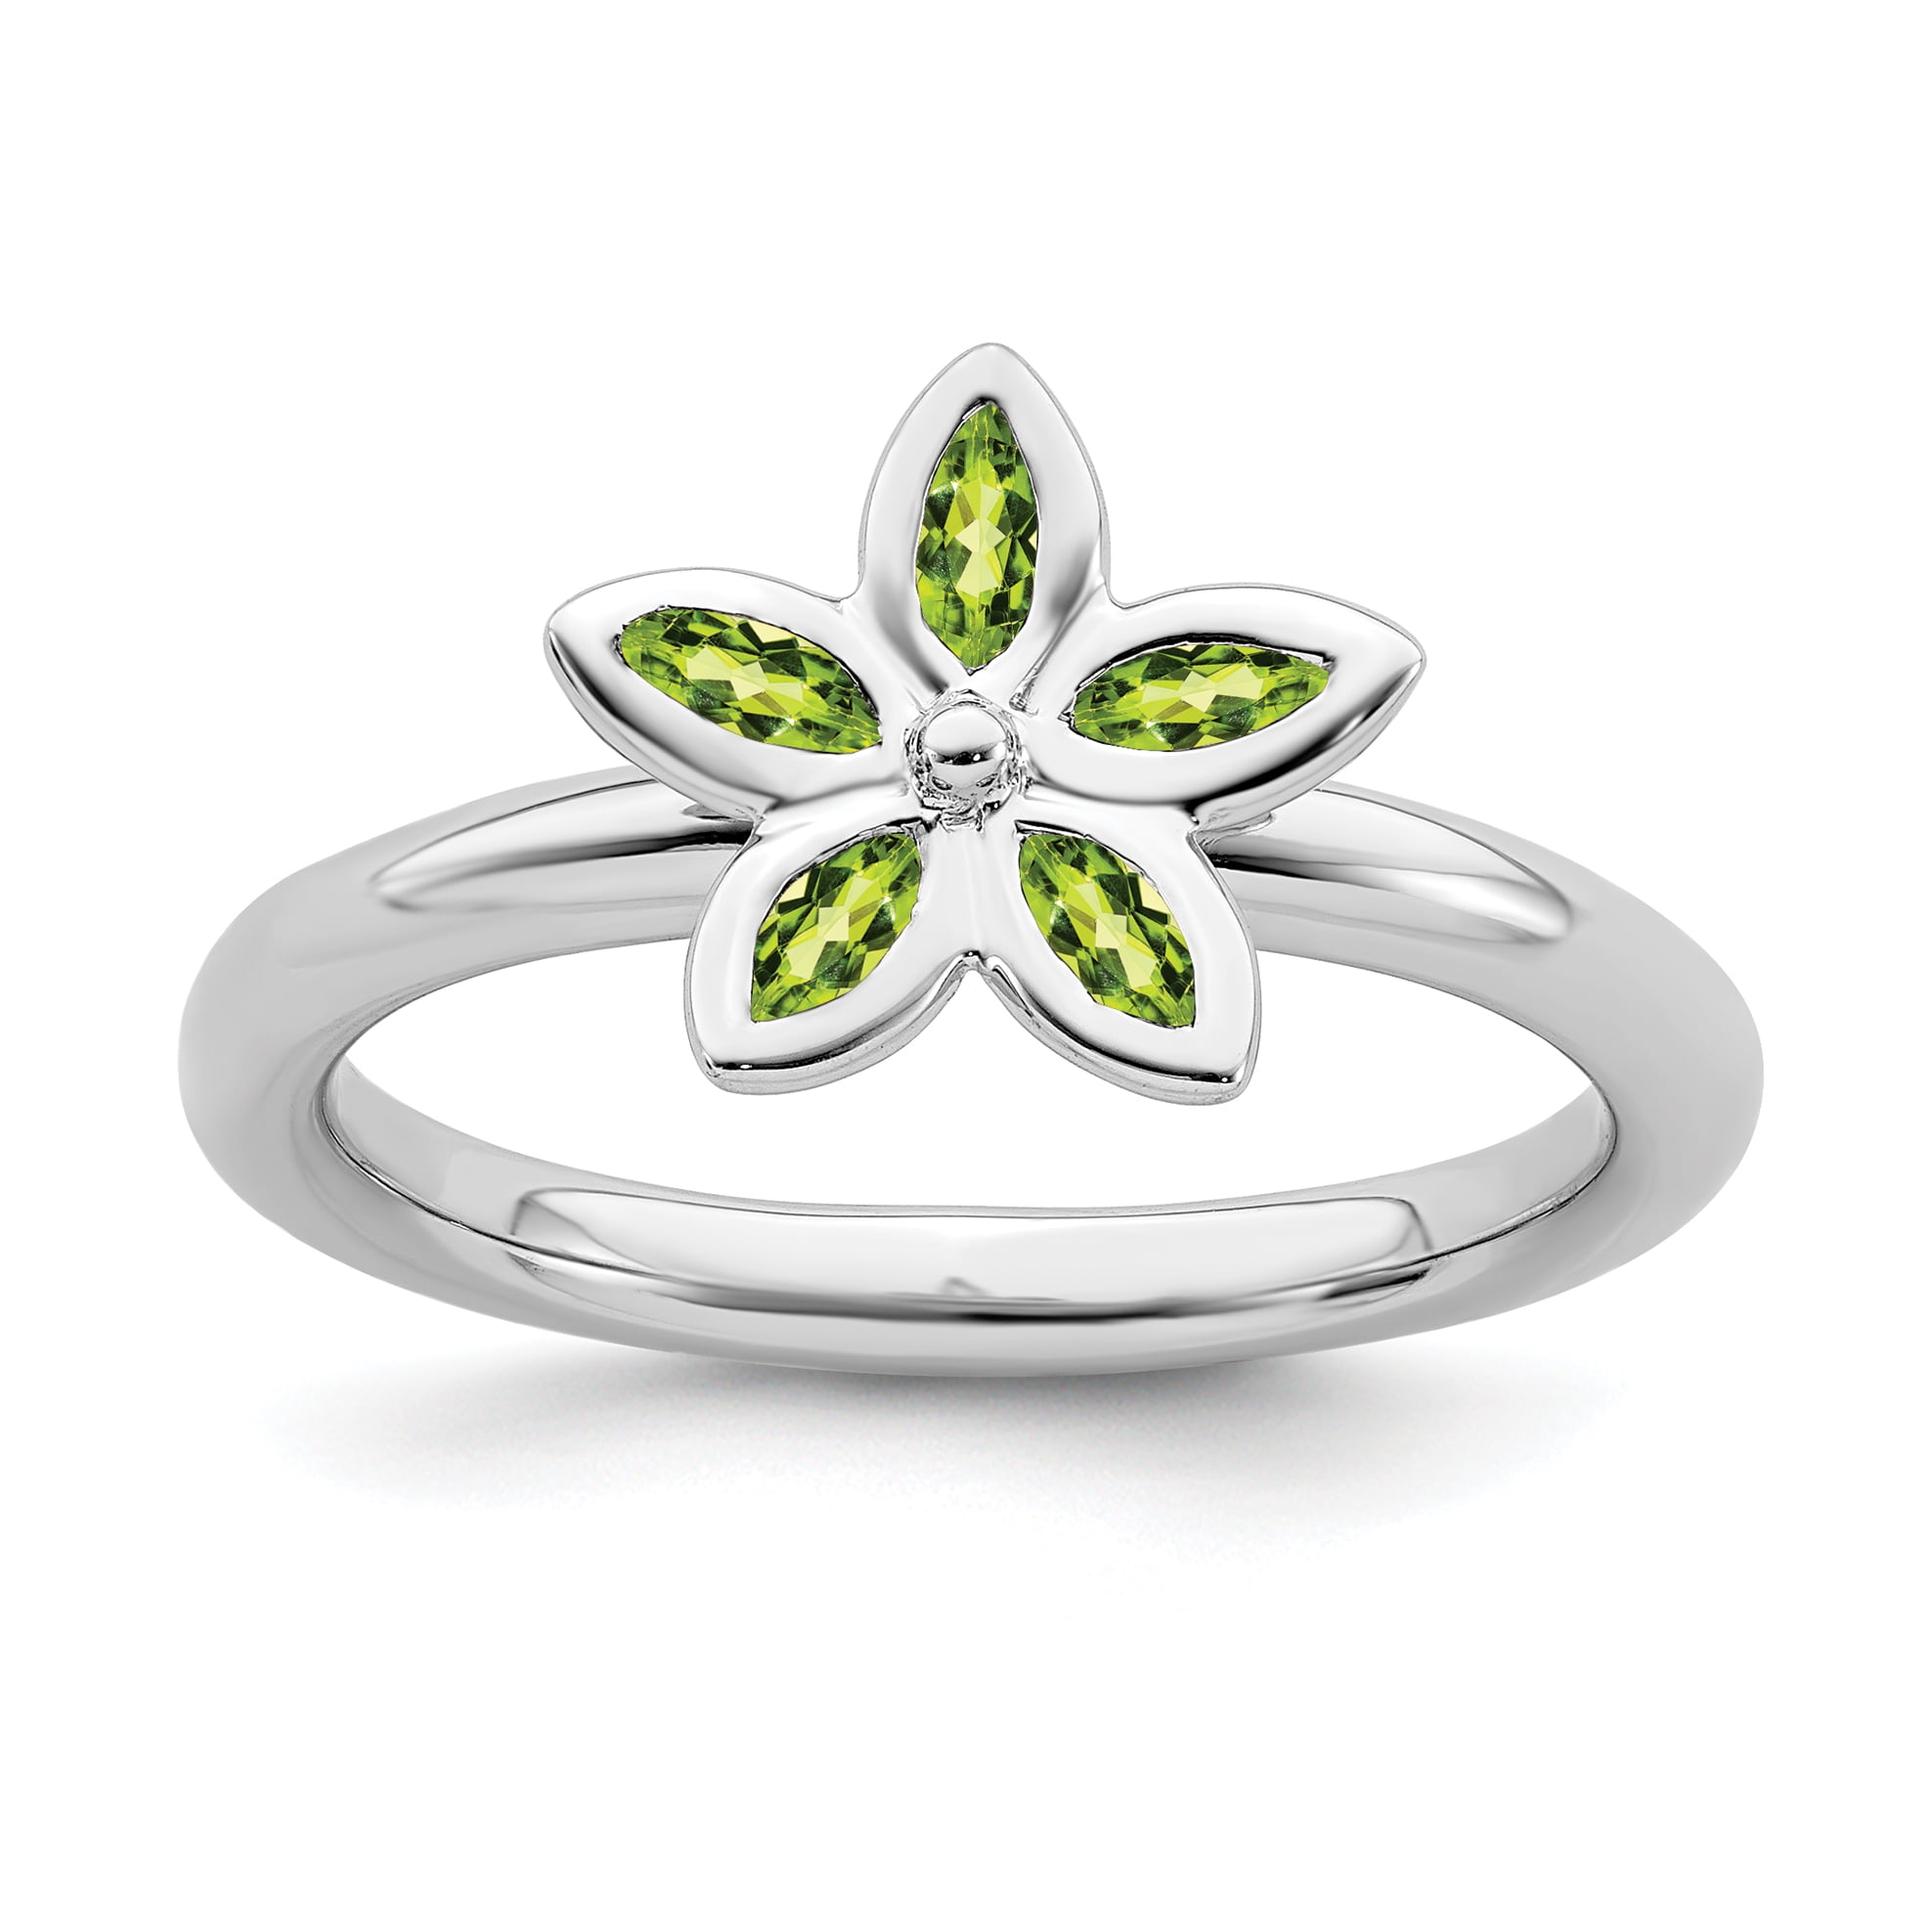 925 Sterling Silver Green Peridot Band Ring Stone Gemstone Fine Jewelry For Women Gifts For Her